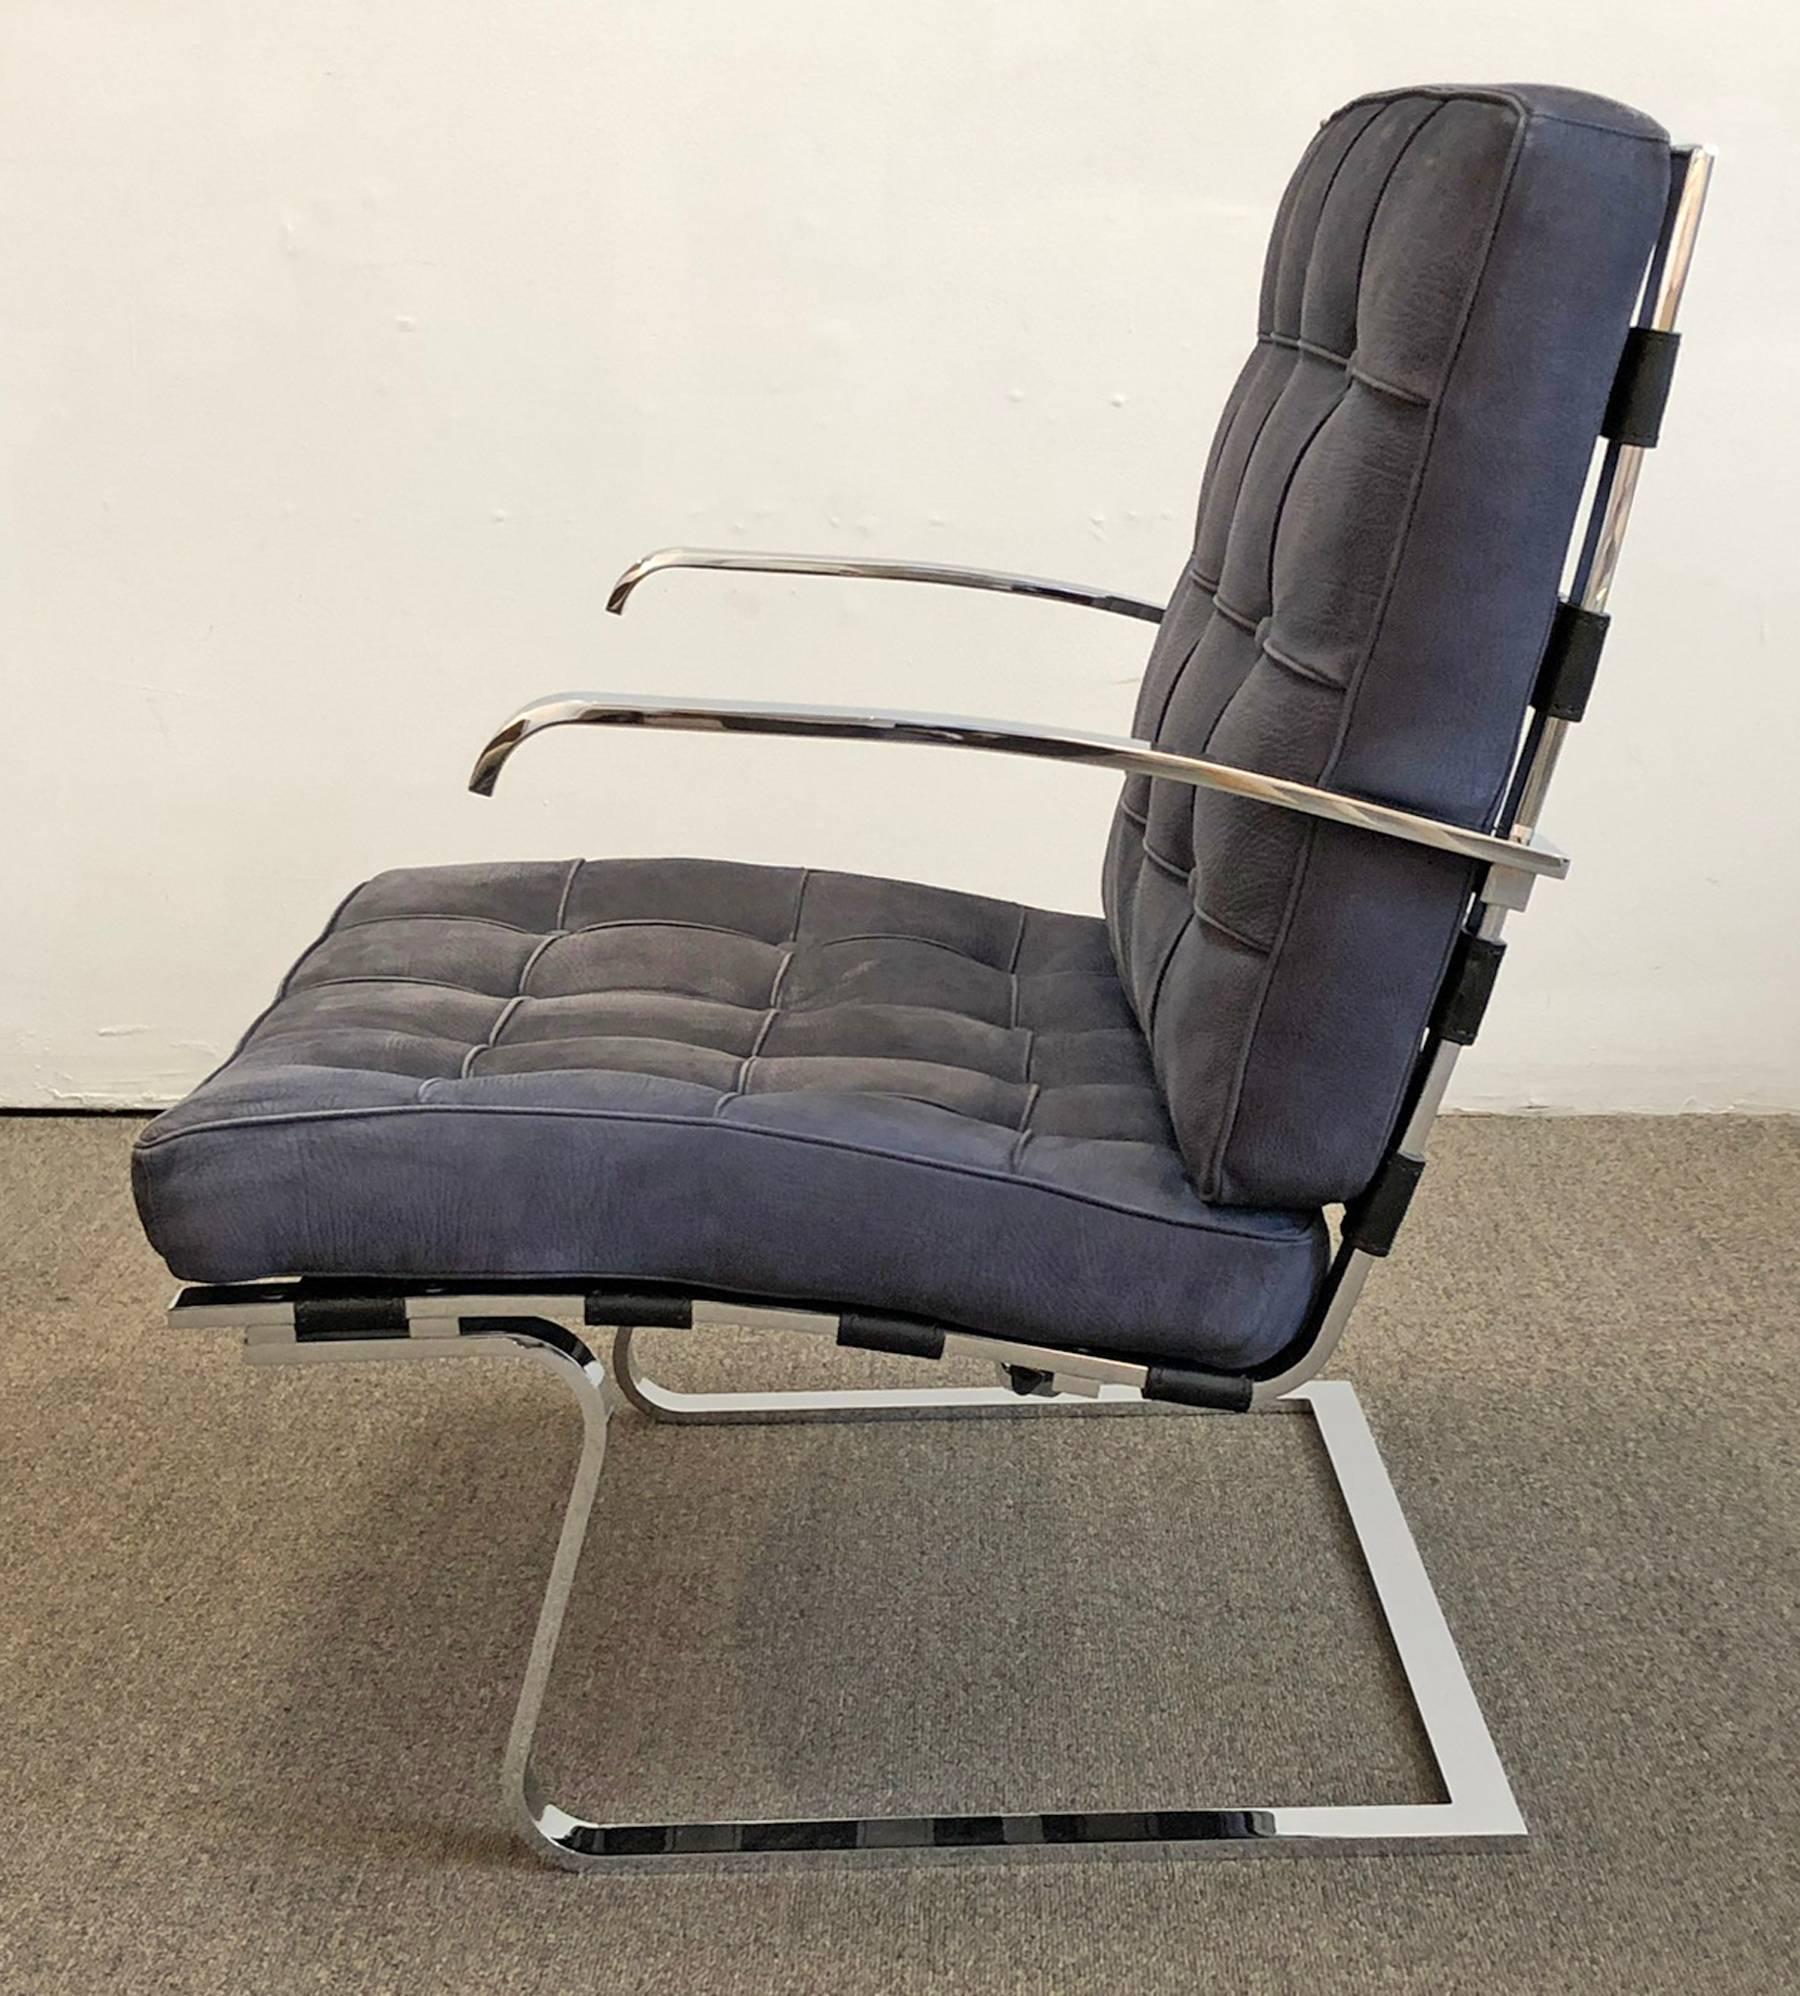 Model MR70 Tugendhat chair designed by Mies van der Rohe and Lilly Reich. Manufactured by Alivar in the 1990s, the company that authorized to reproduce the furniture for the restoration of the Tugendhat Villa. The material is dark blue suede and is